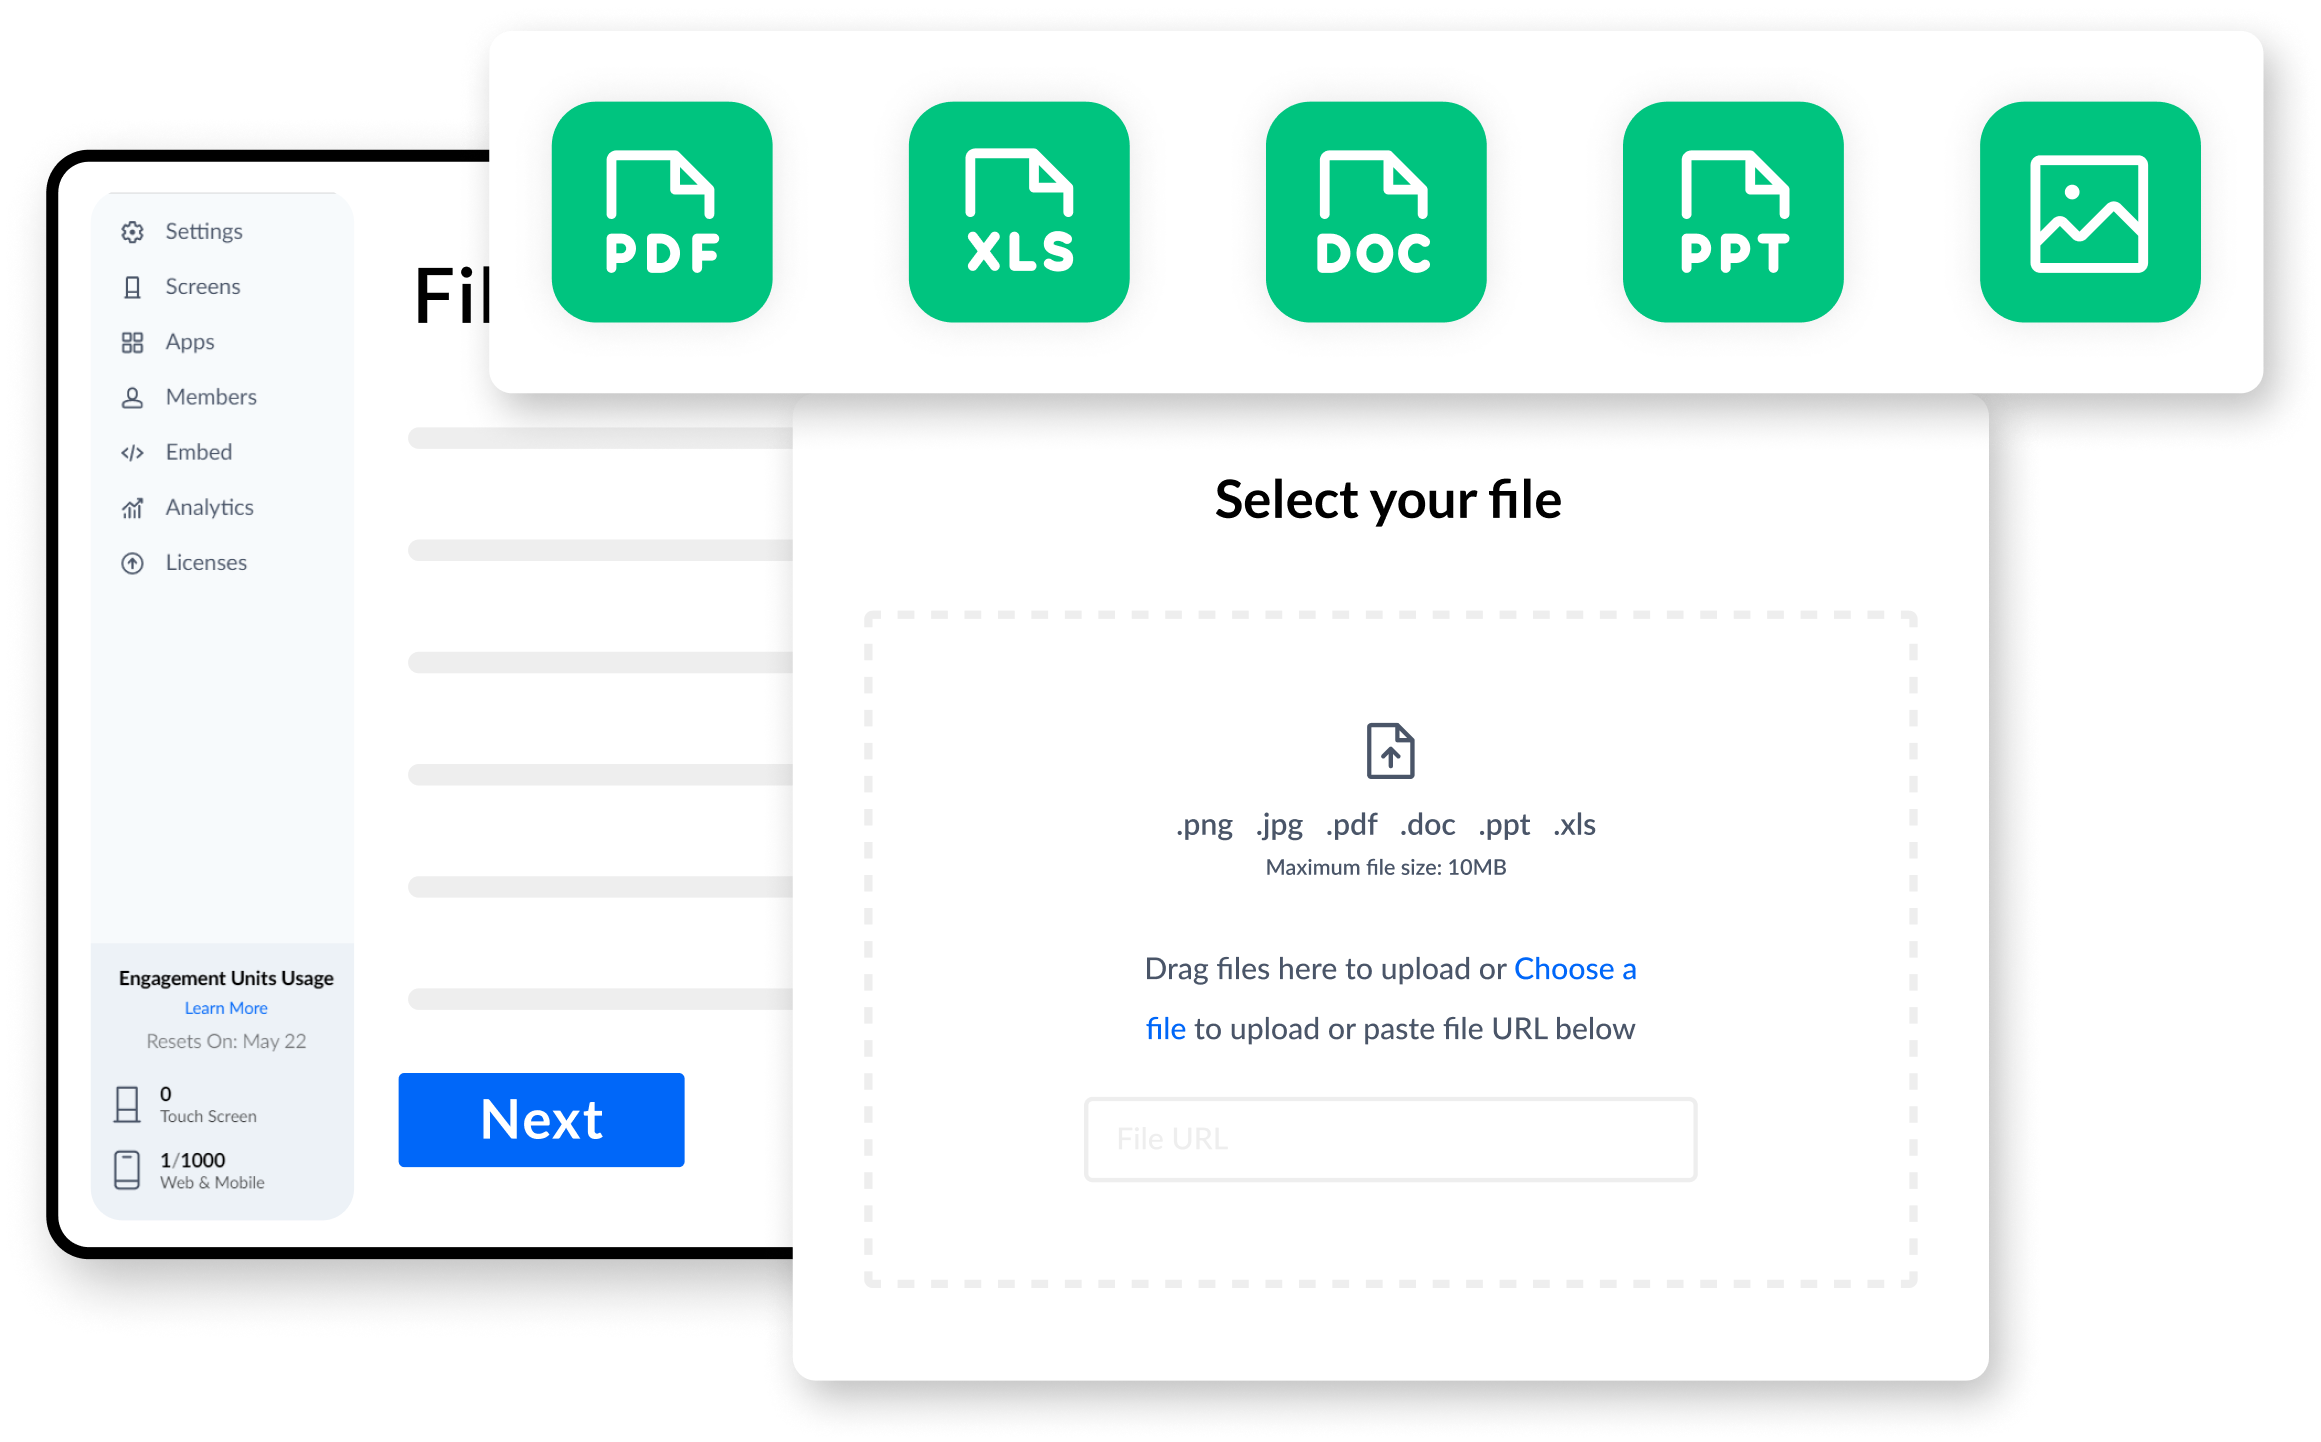 HootBoard File App: Types of Files